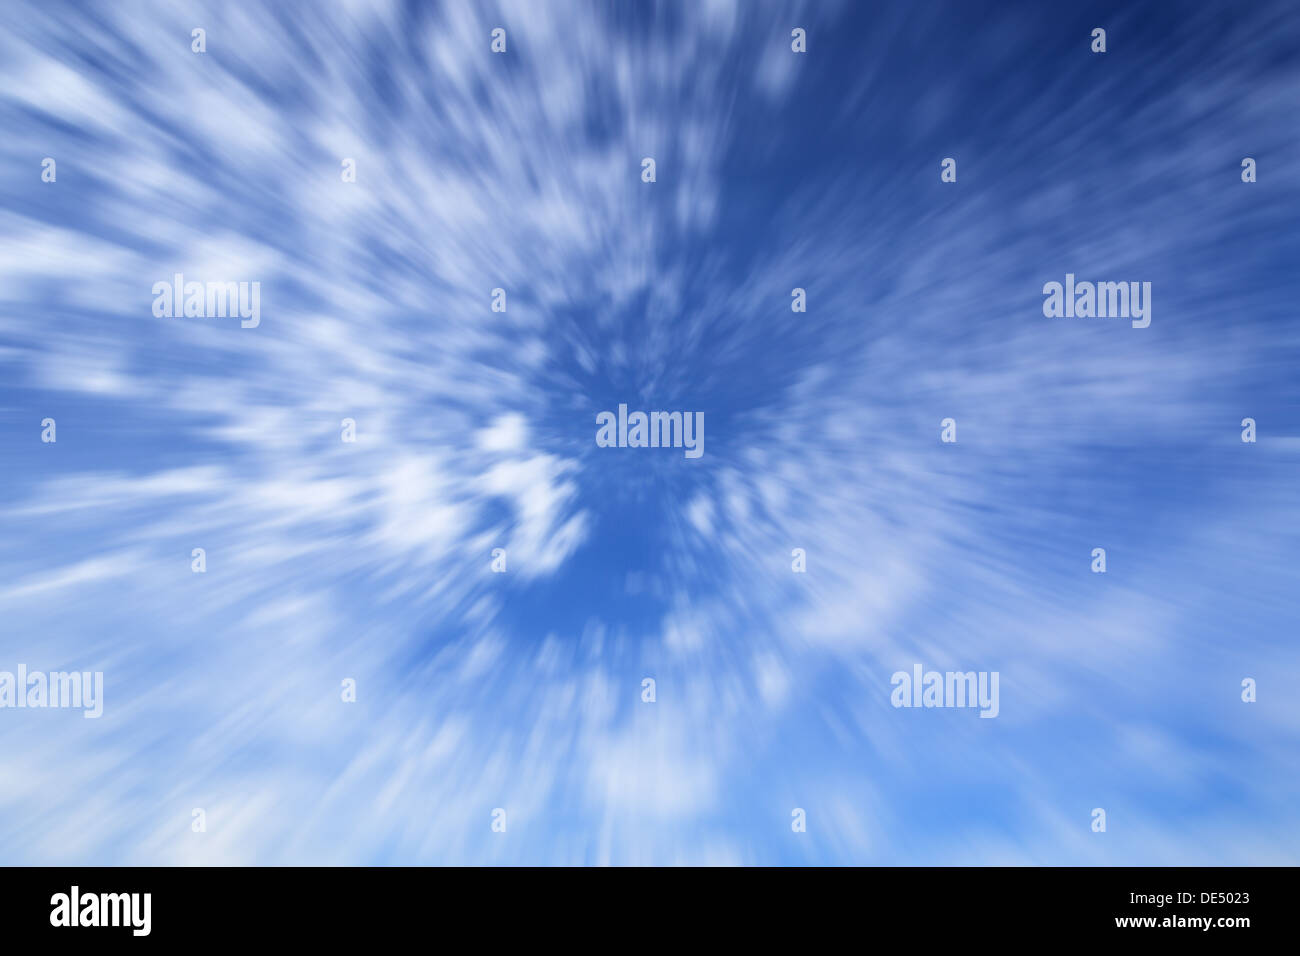 The abstract radial blue blured background Stock Photo